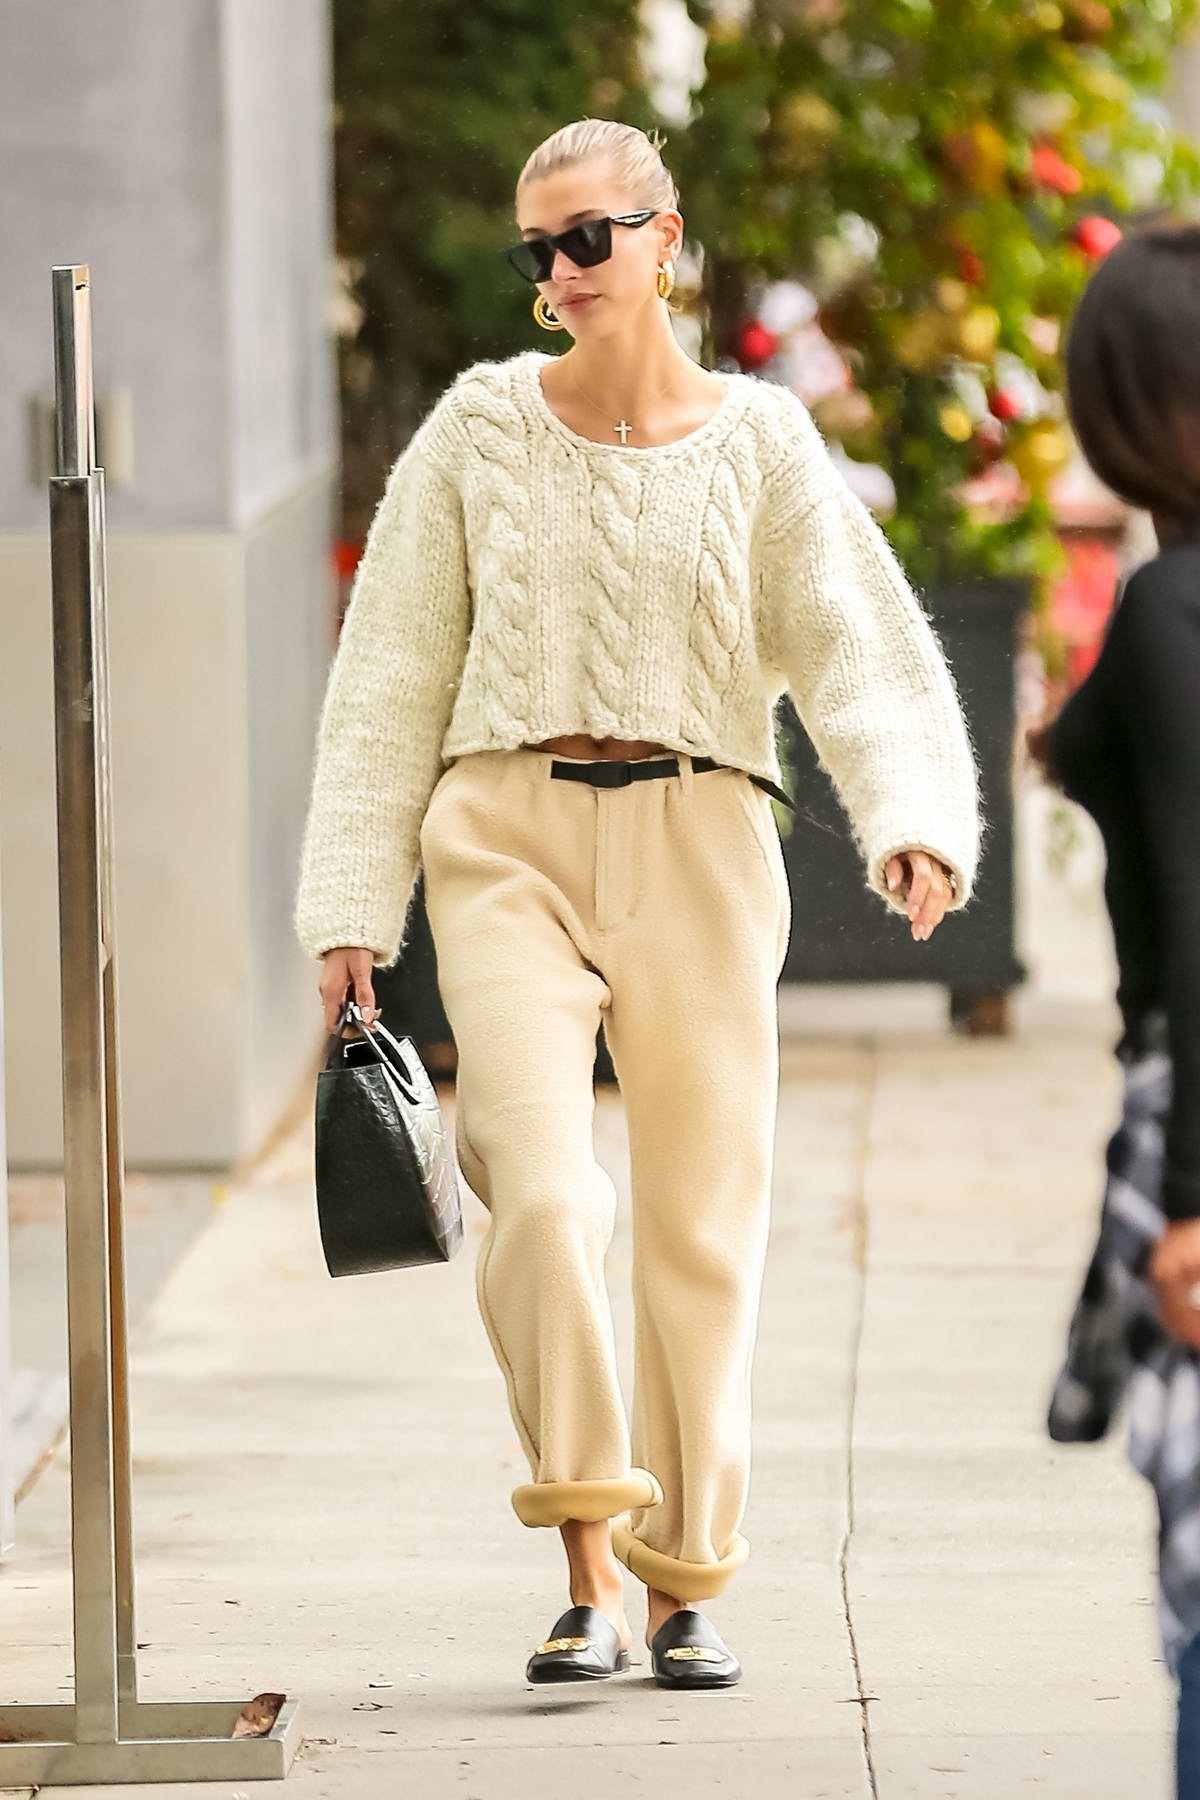 Hailey Bieber looks casual chic in a silk outfit while out running errands  in Los Angeles